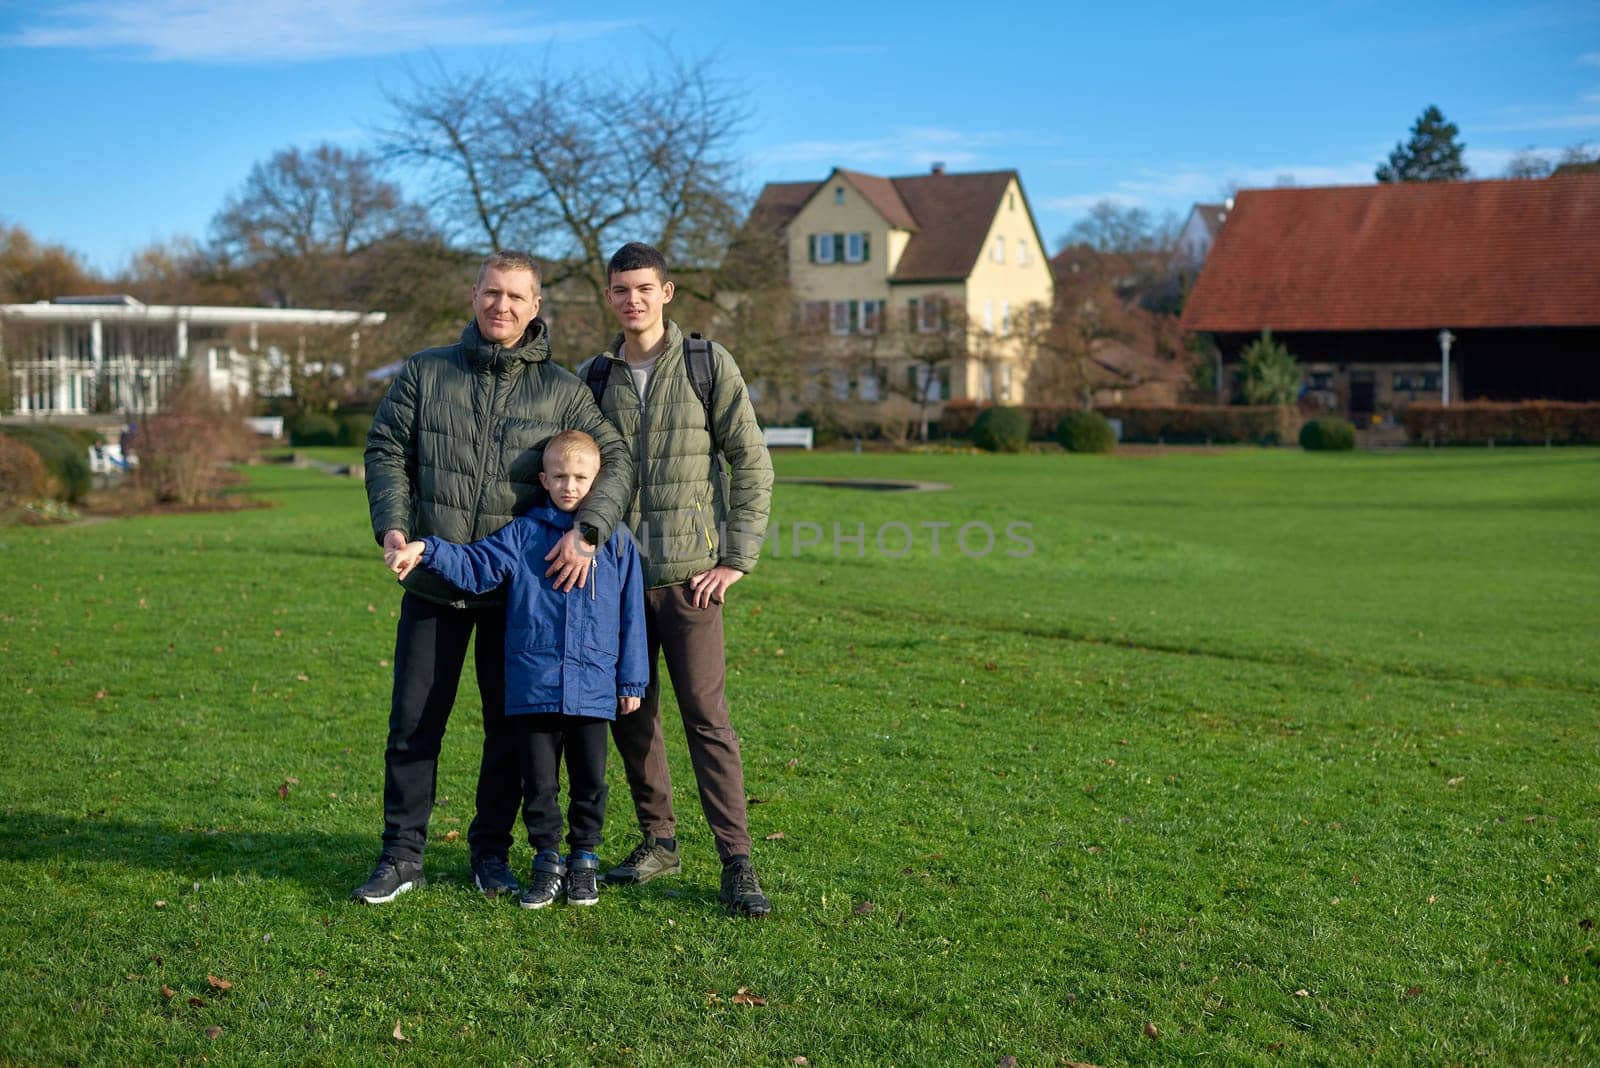 Family Harmony: Father, 40 Years Old, and Two Sons - Beautiful 8-Year-Old Boy and 17-Year-Old Young Man, Standing on the Lawn in a Park with Vintage Half-Timbered Buildings, Bietigheim-Bissingen, Germany, Autumn. Embrace the essence of family togetherness with this heartwarming image featuring a father, 40 years old, and his two sons - a beautiful 8-year-old boy and a 17-year-old young man. Standing on the lush lawn in a park with vintage half-timbered buildings in Bietigheim-Bissingen, Germany, this captures the warmth of familial bonds amidst the autumnal beauty.